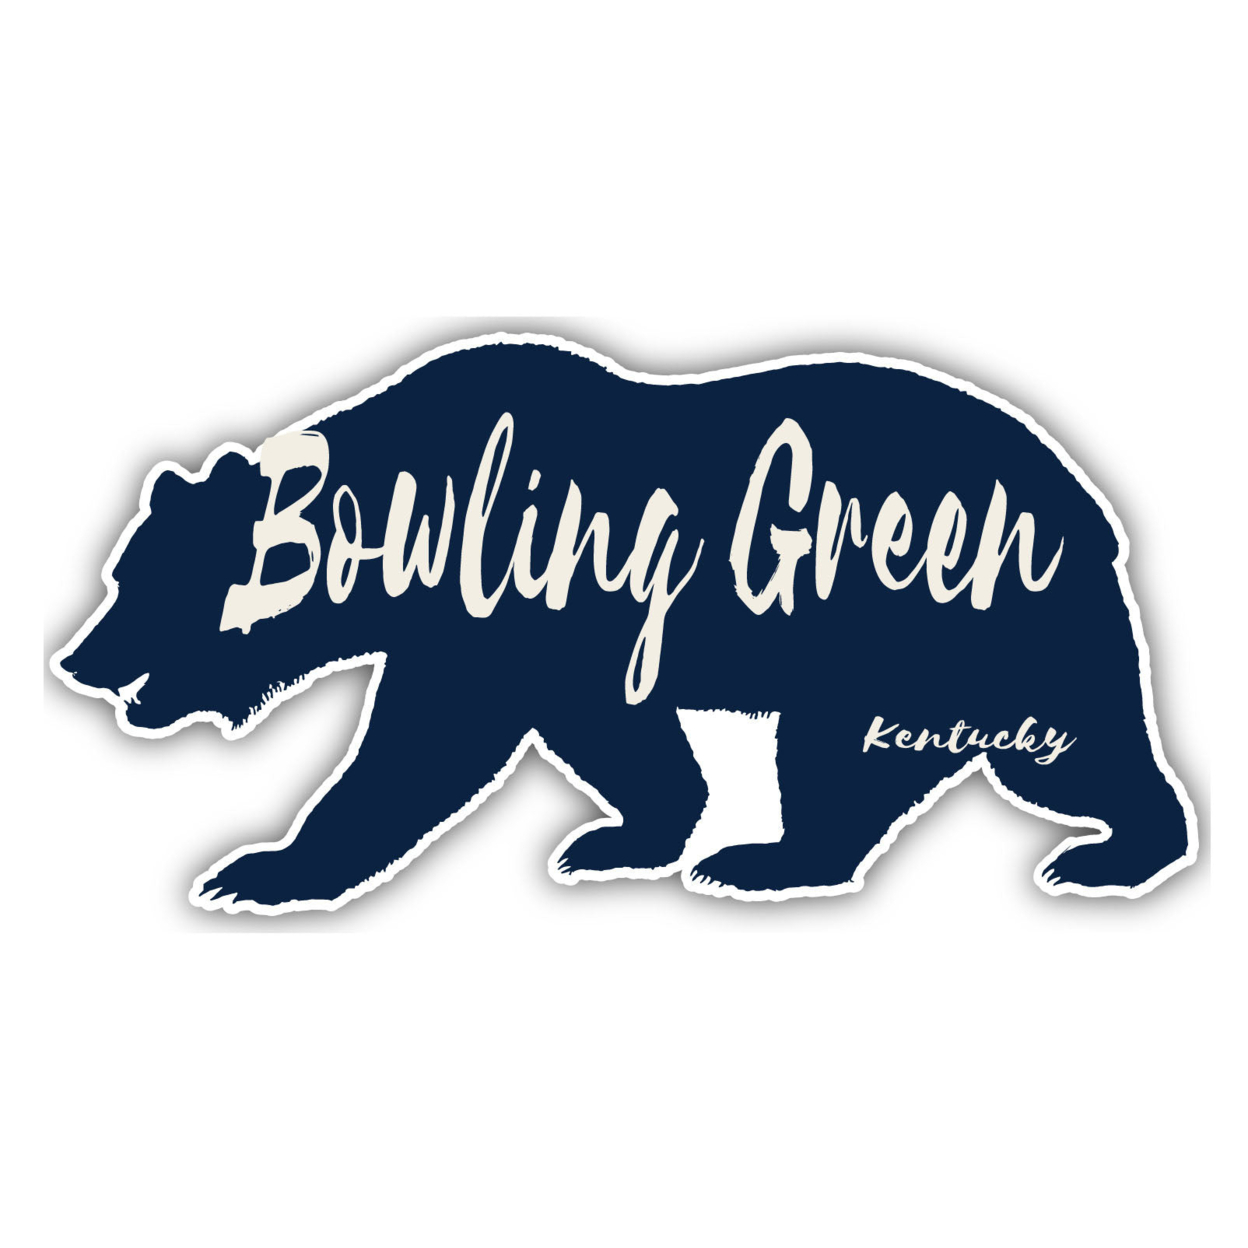 Bowling Green Kentucky Souvenir Decorative Stickers (Choose Theme And Size) - Single Unit, 8-Inch, Camp Life